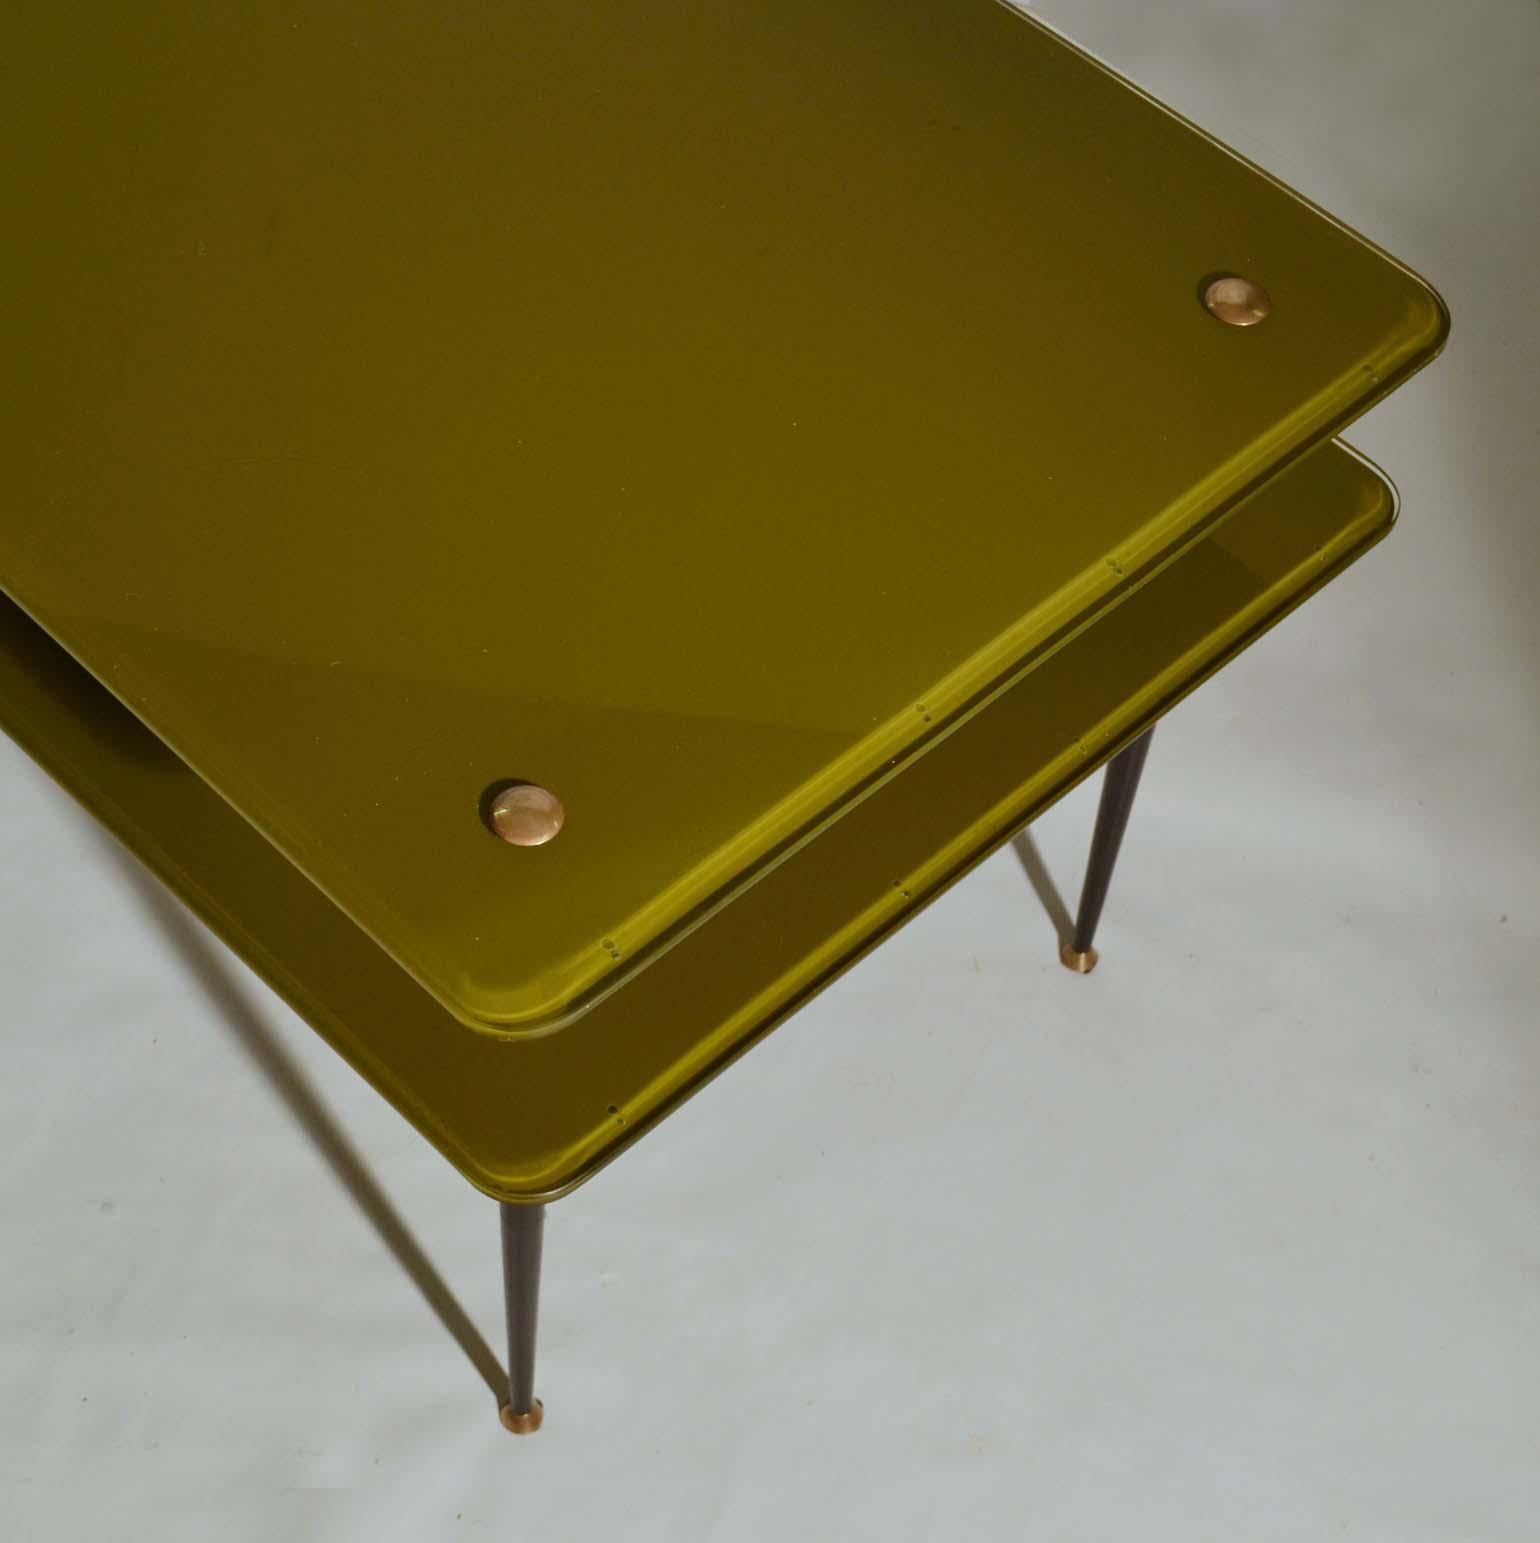 Metal Olive Green Glass Coffee Table by Eduardo Paoli for Vitrex, Italy 1950s For Sale